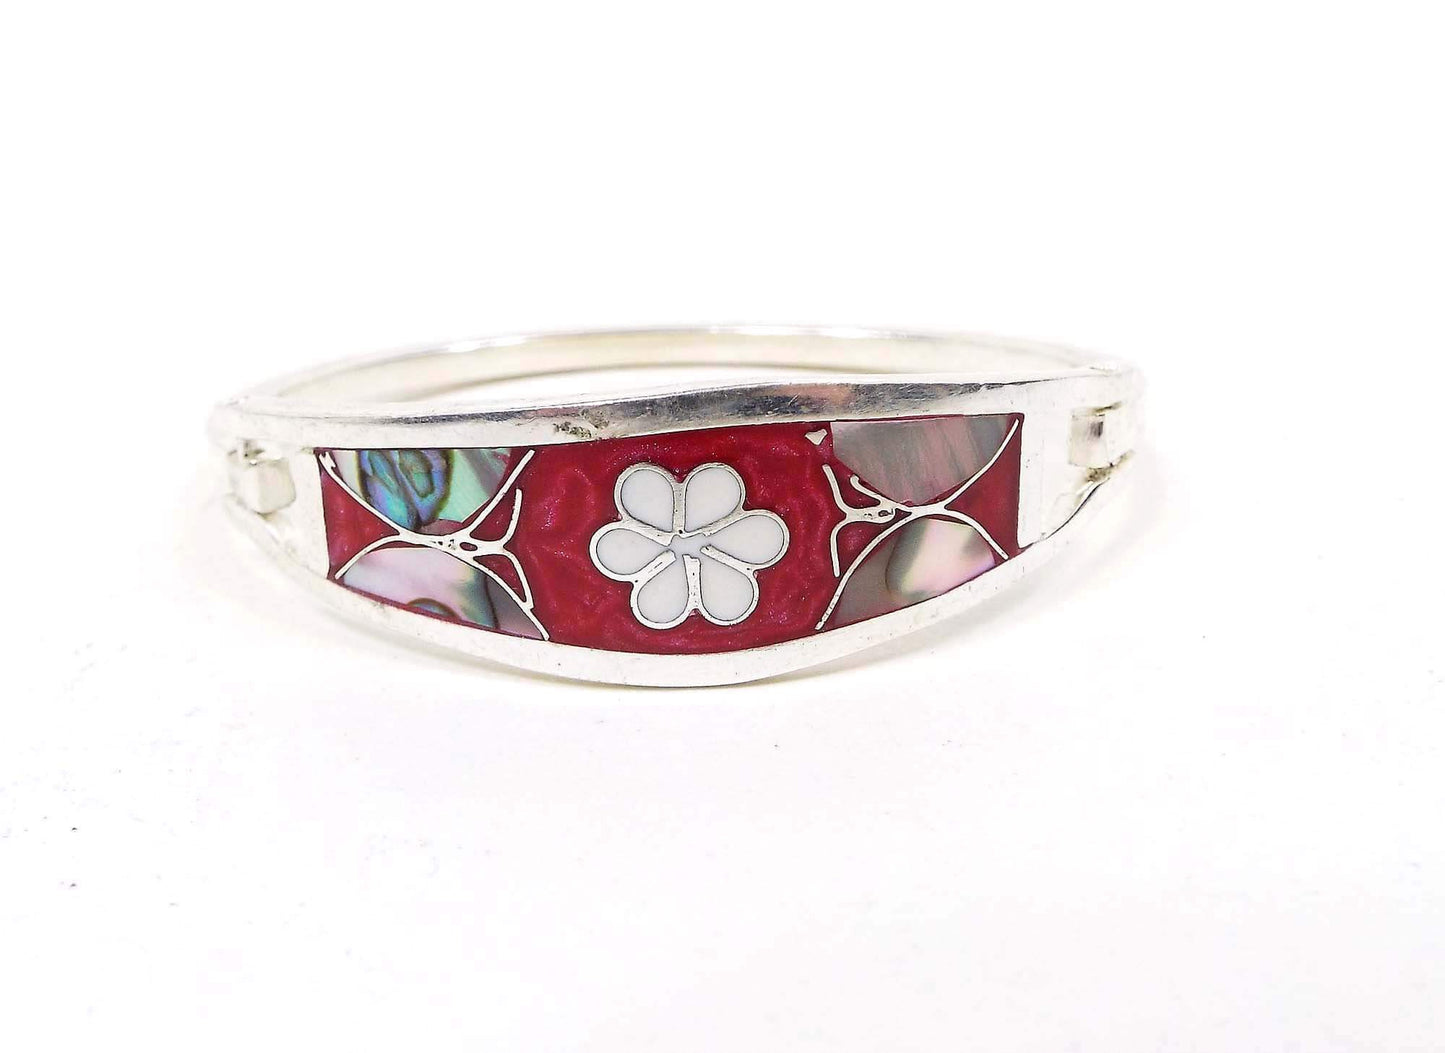 Small Mexican Flower and Butterfly Vintage Hinged Bangle Bracelet